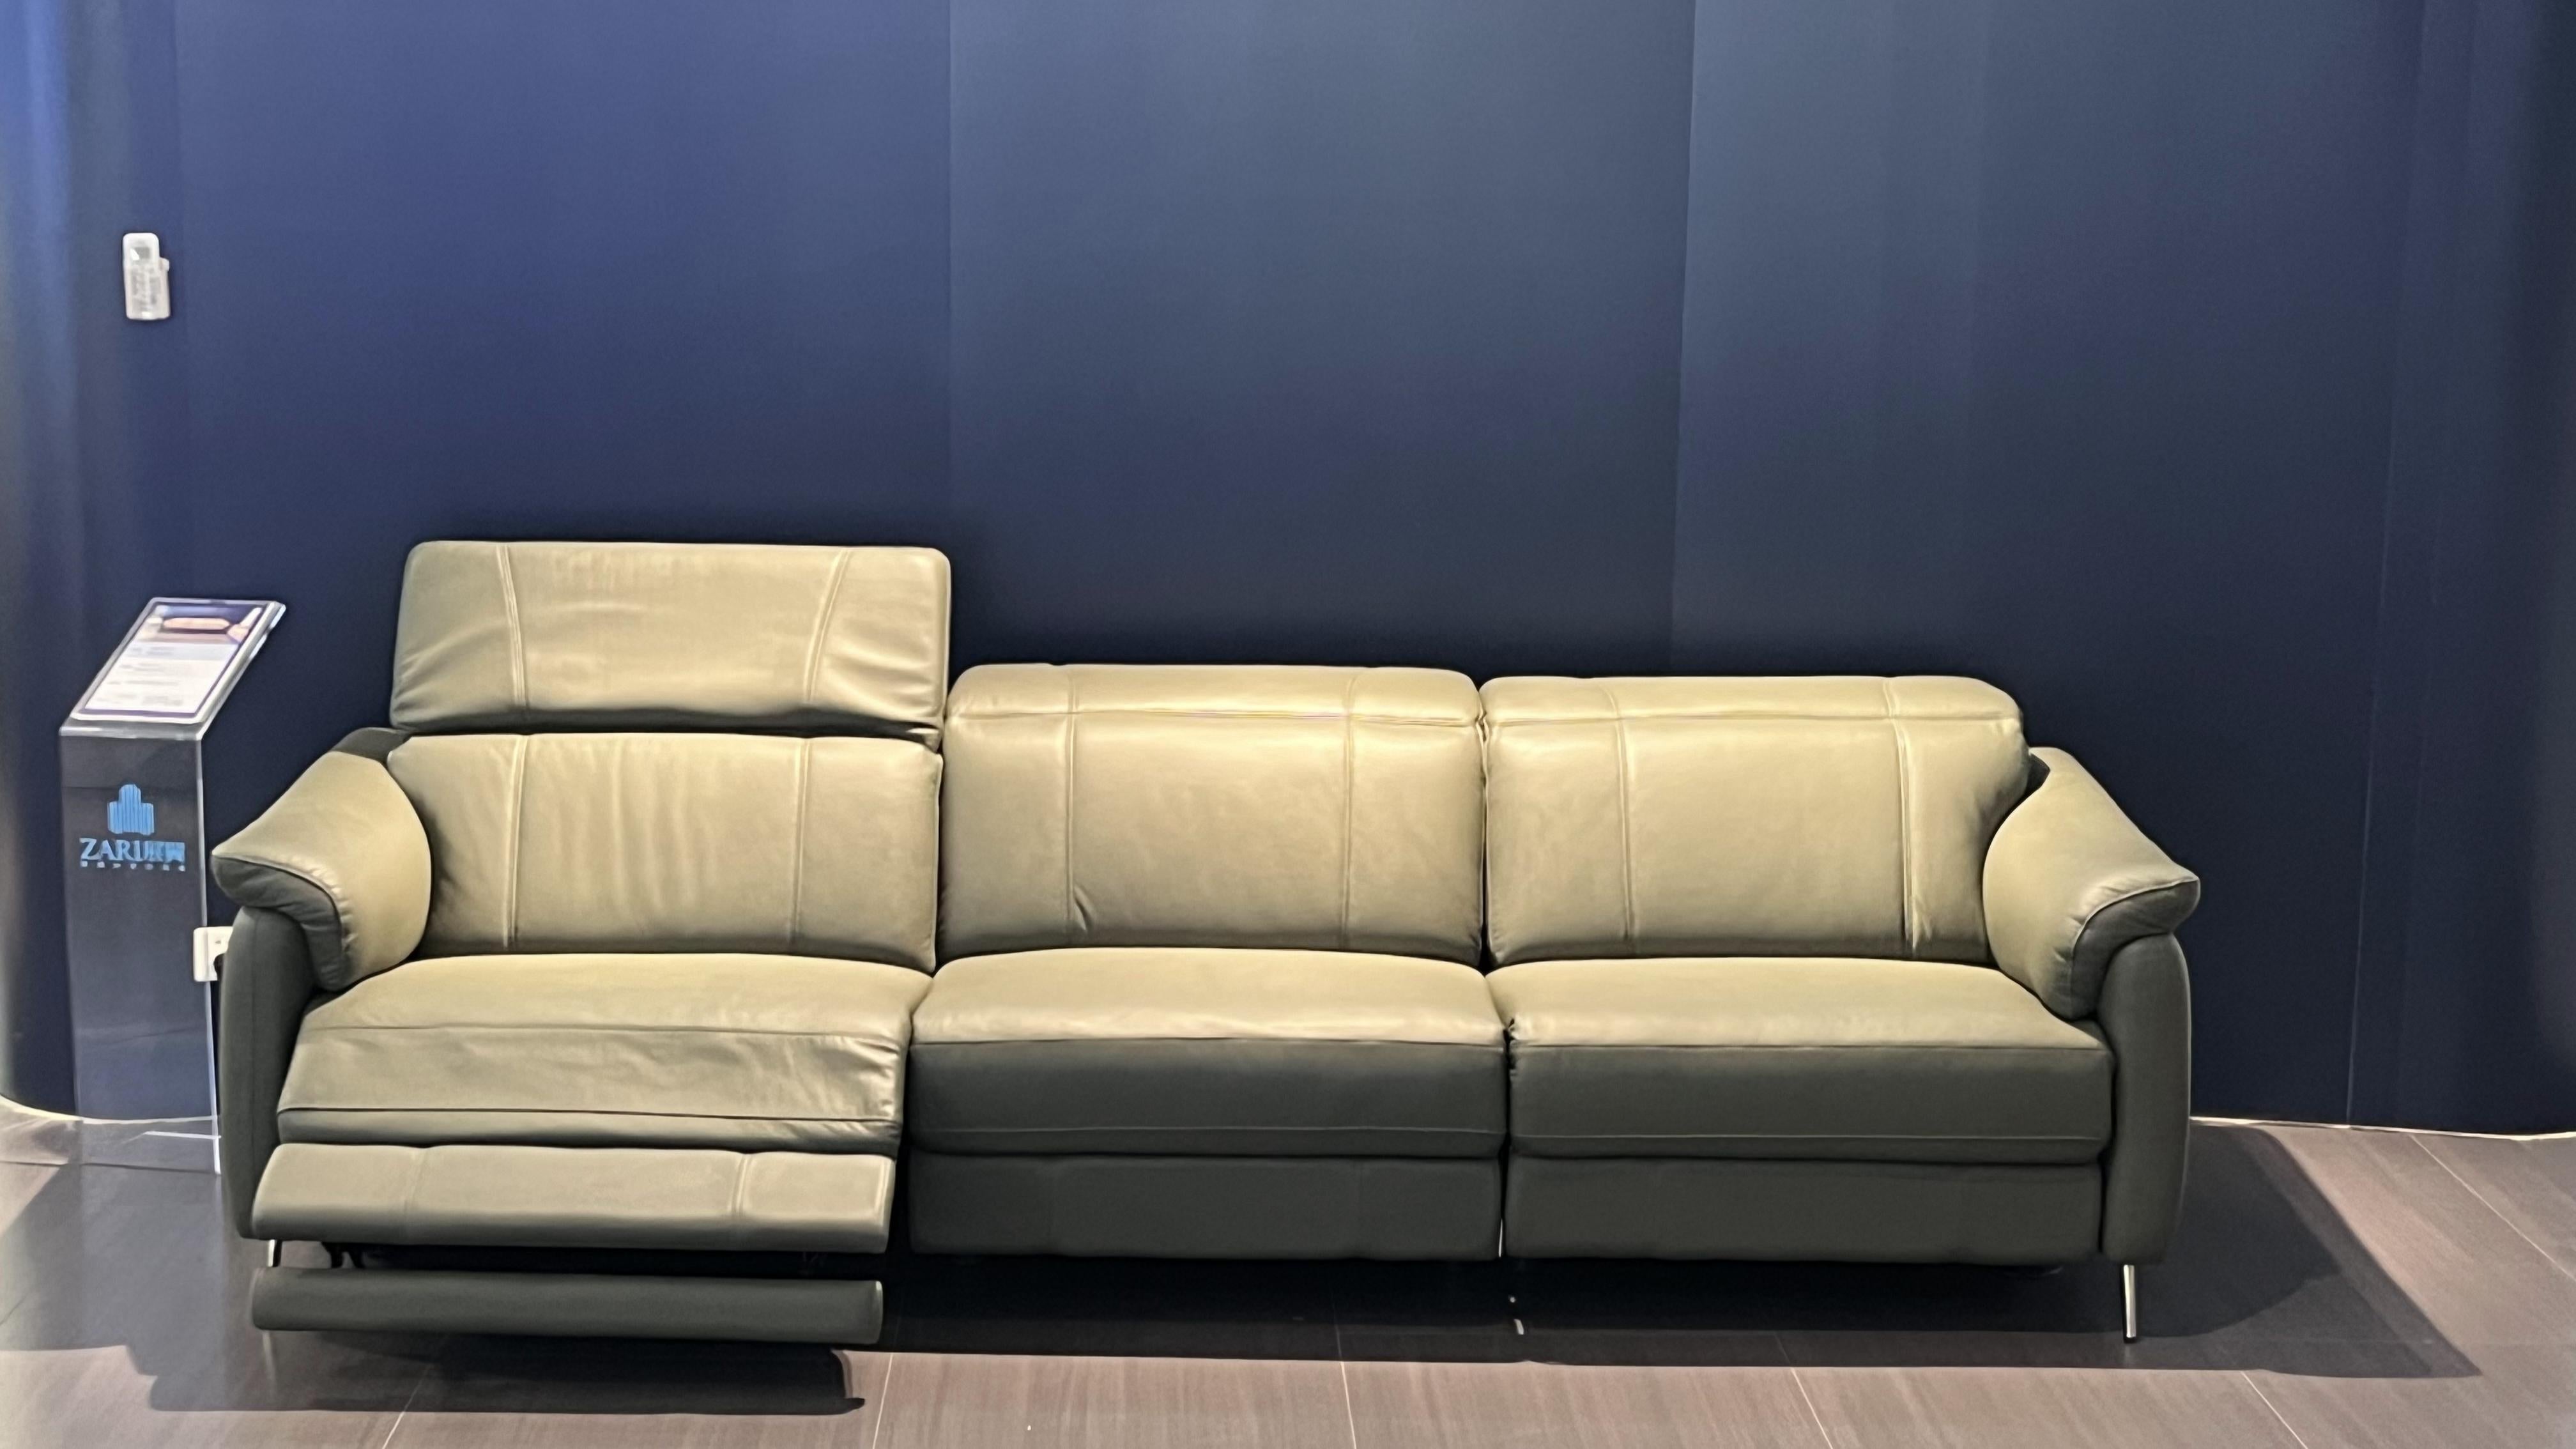 Comparing Reclining Features of Different Sofa Types: Enhancing Movie Watching Experience and Relaxation